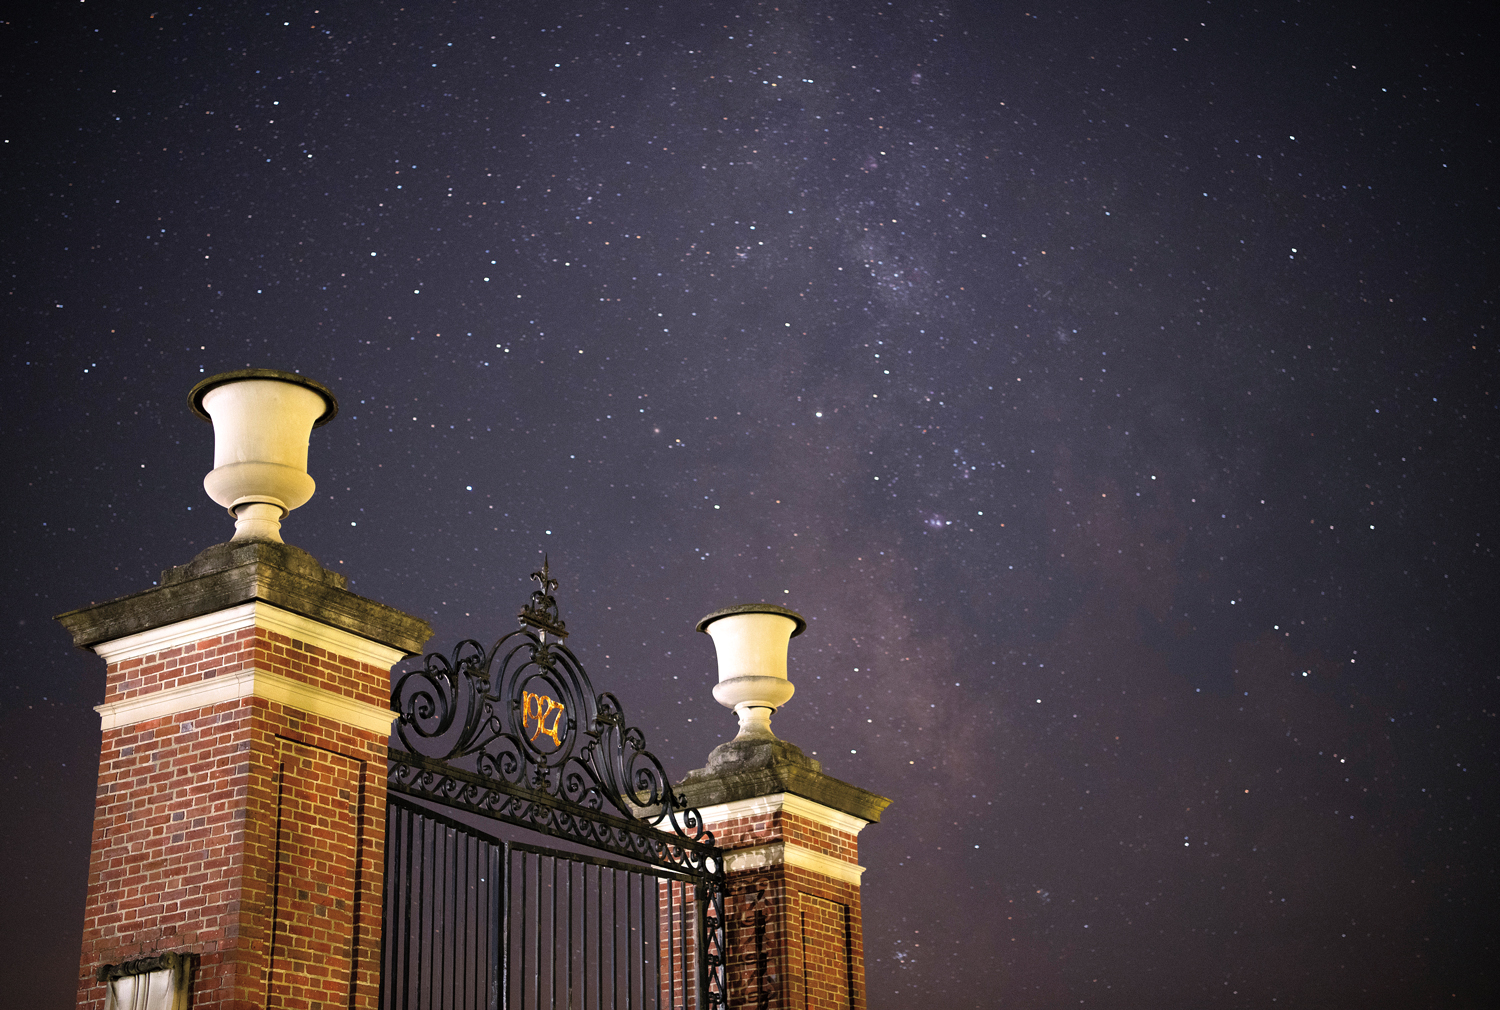 Bucknell gate and the starry night sky